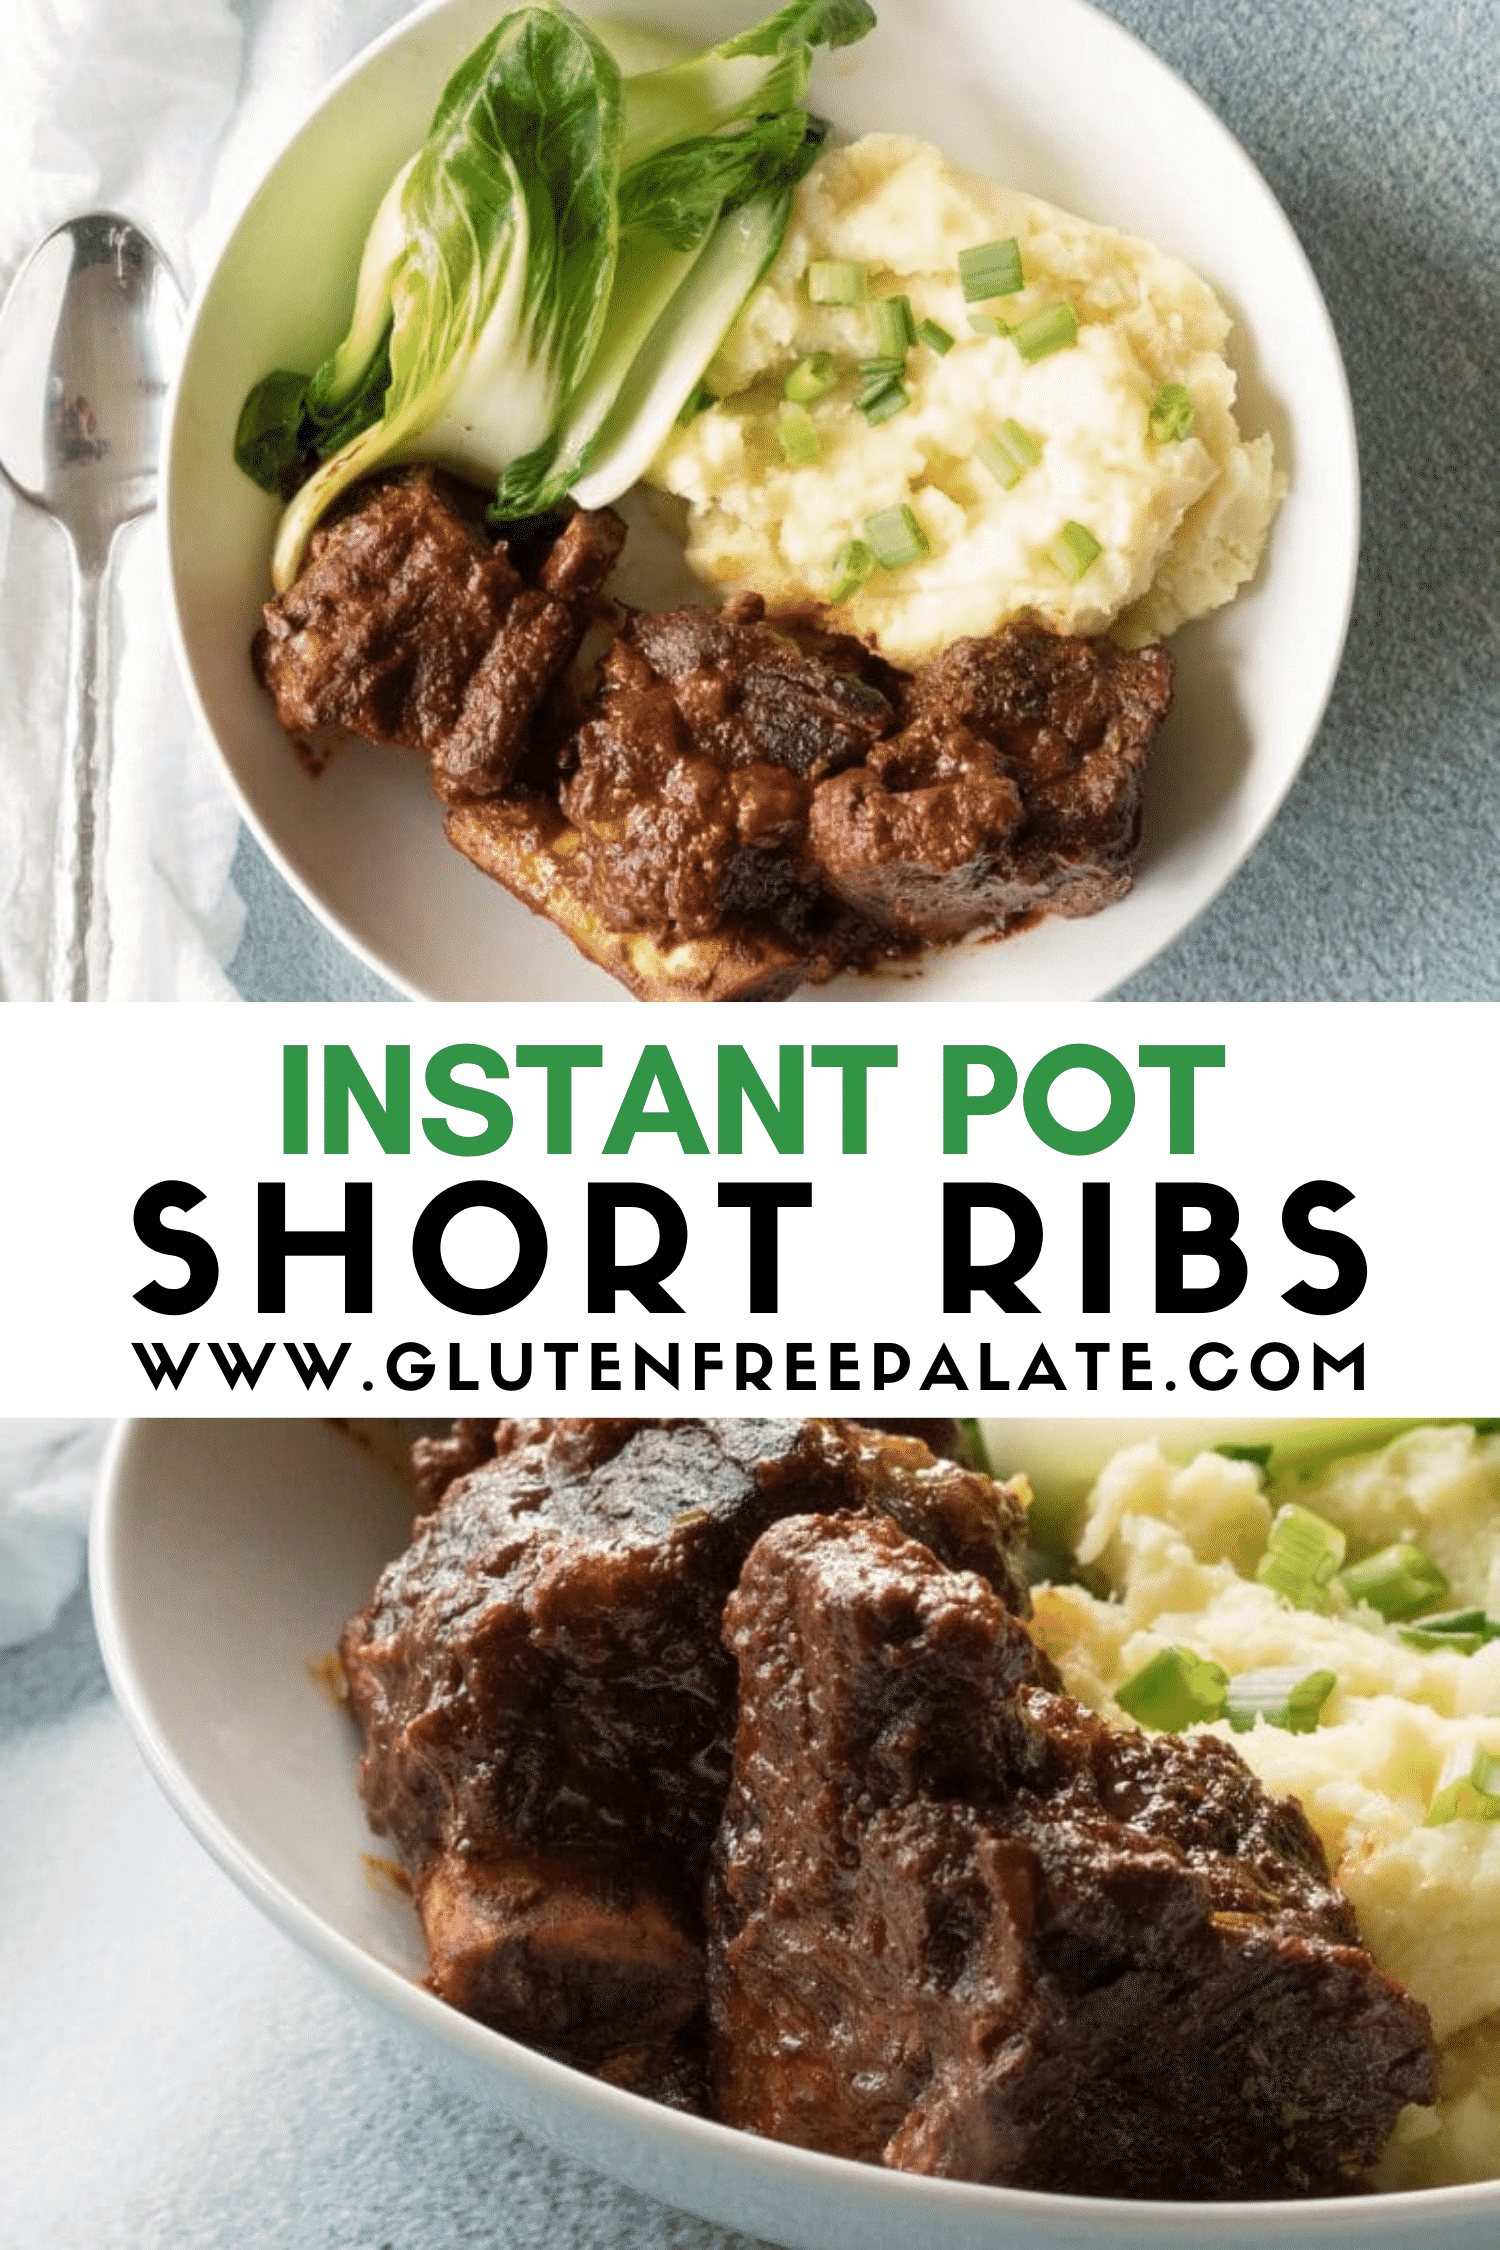 images of plated instant pot short ribs with text overlay